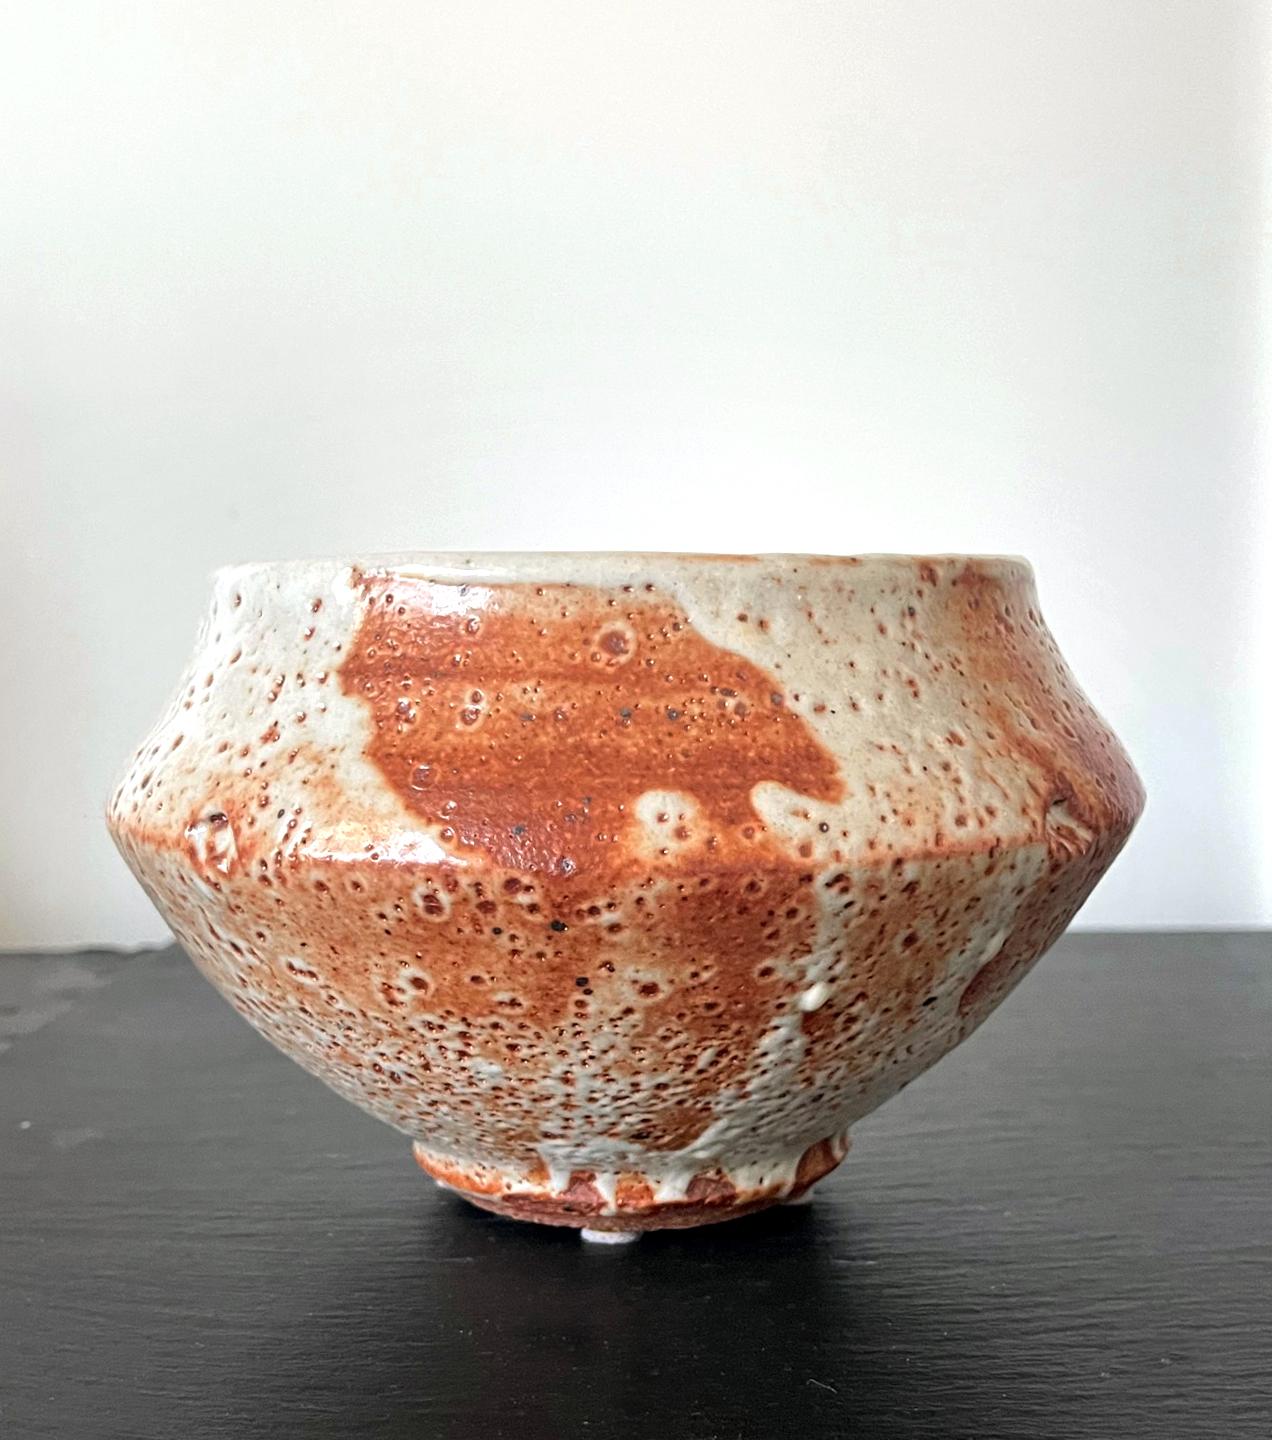 A studio made ceramic tea bowl (Chawan) with a slightly irregular form and exceptional surface glaze by American potter Warren Mackenzie (1924-2018). Reminiscent of a monk's begging bowl, the stoneware was covered in an orange and white Shino ware